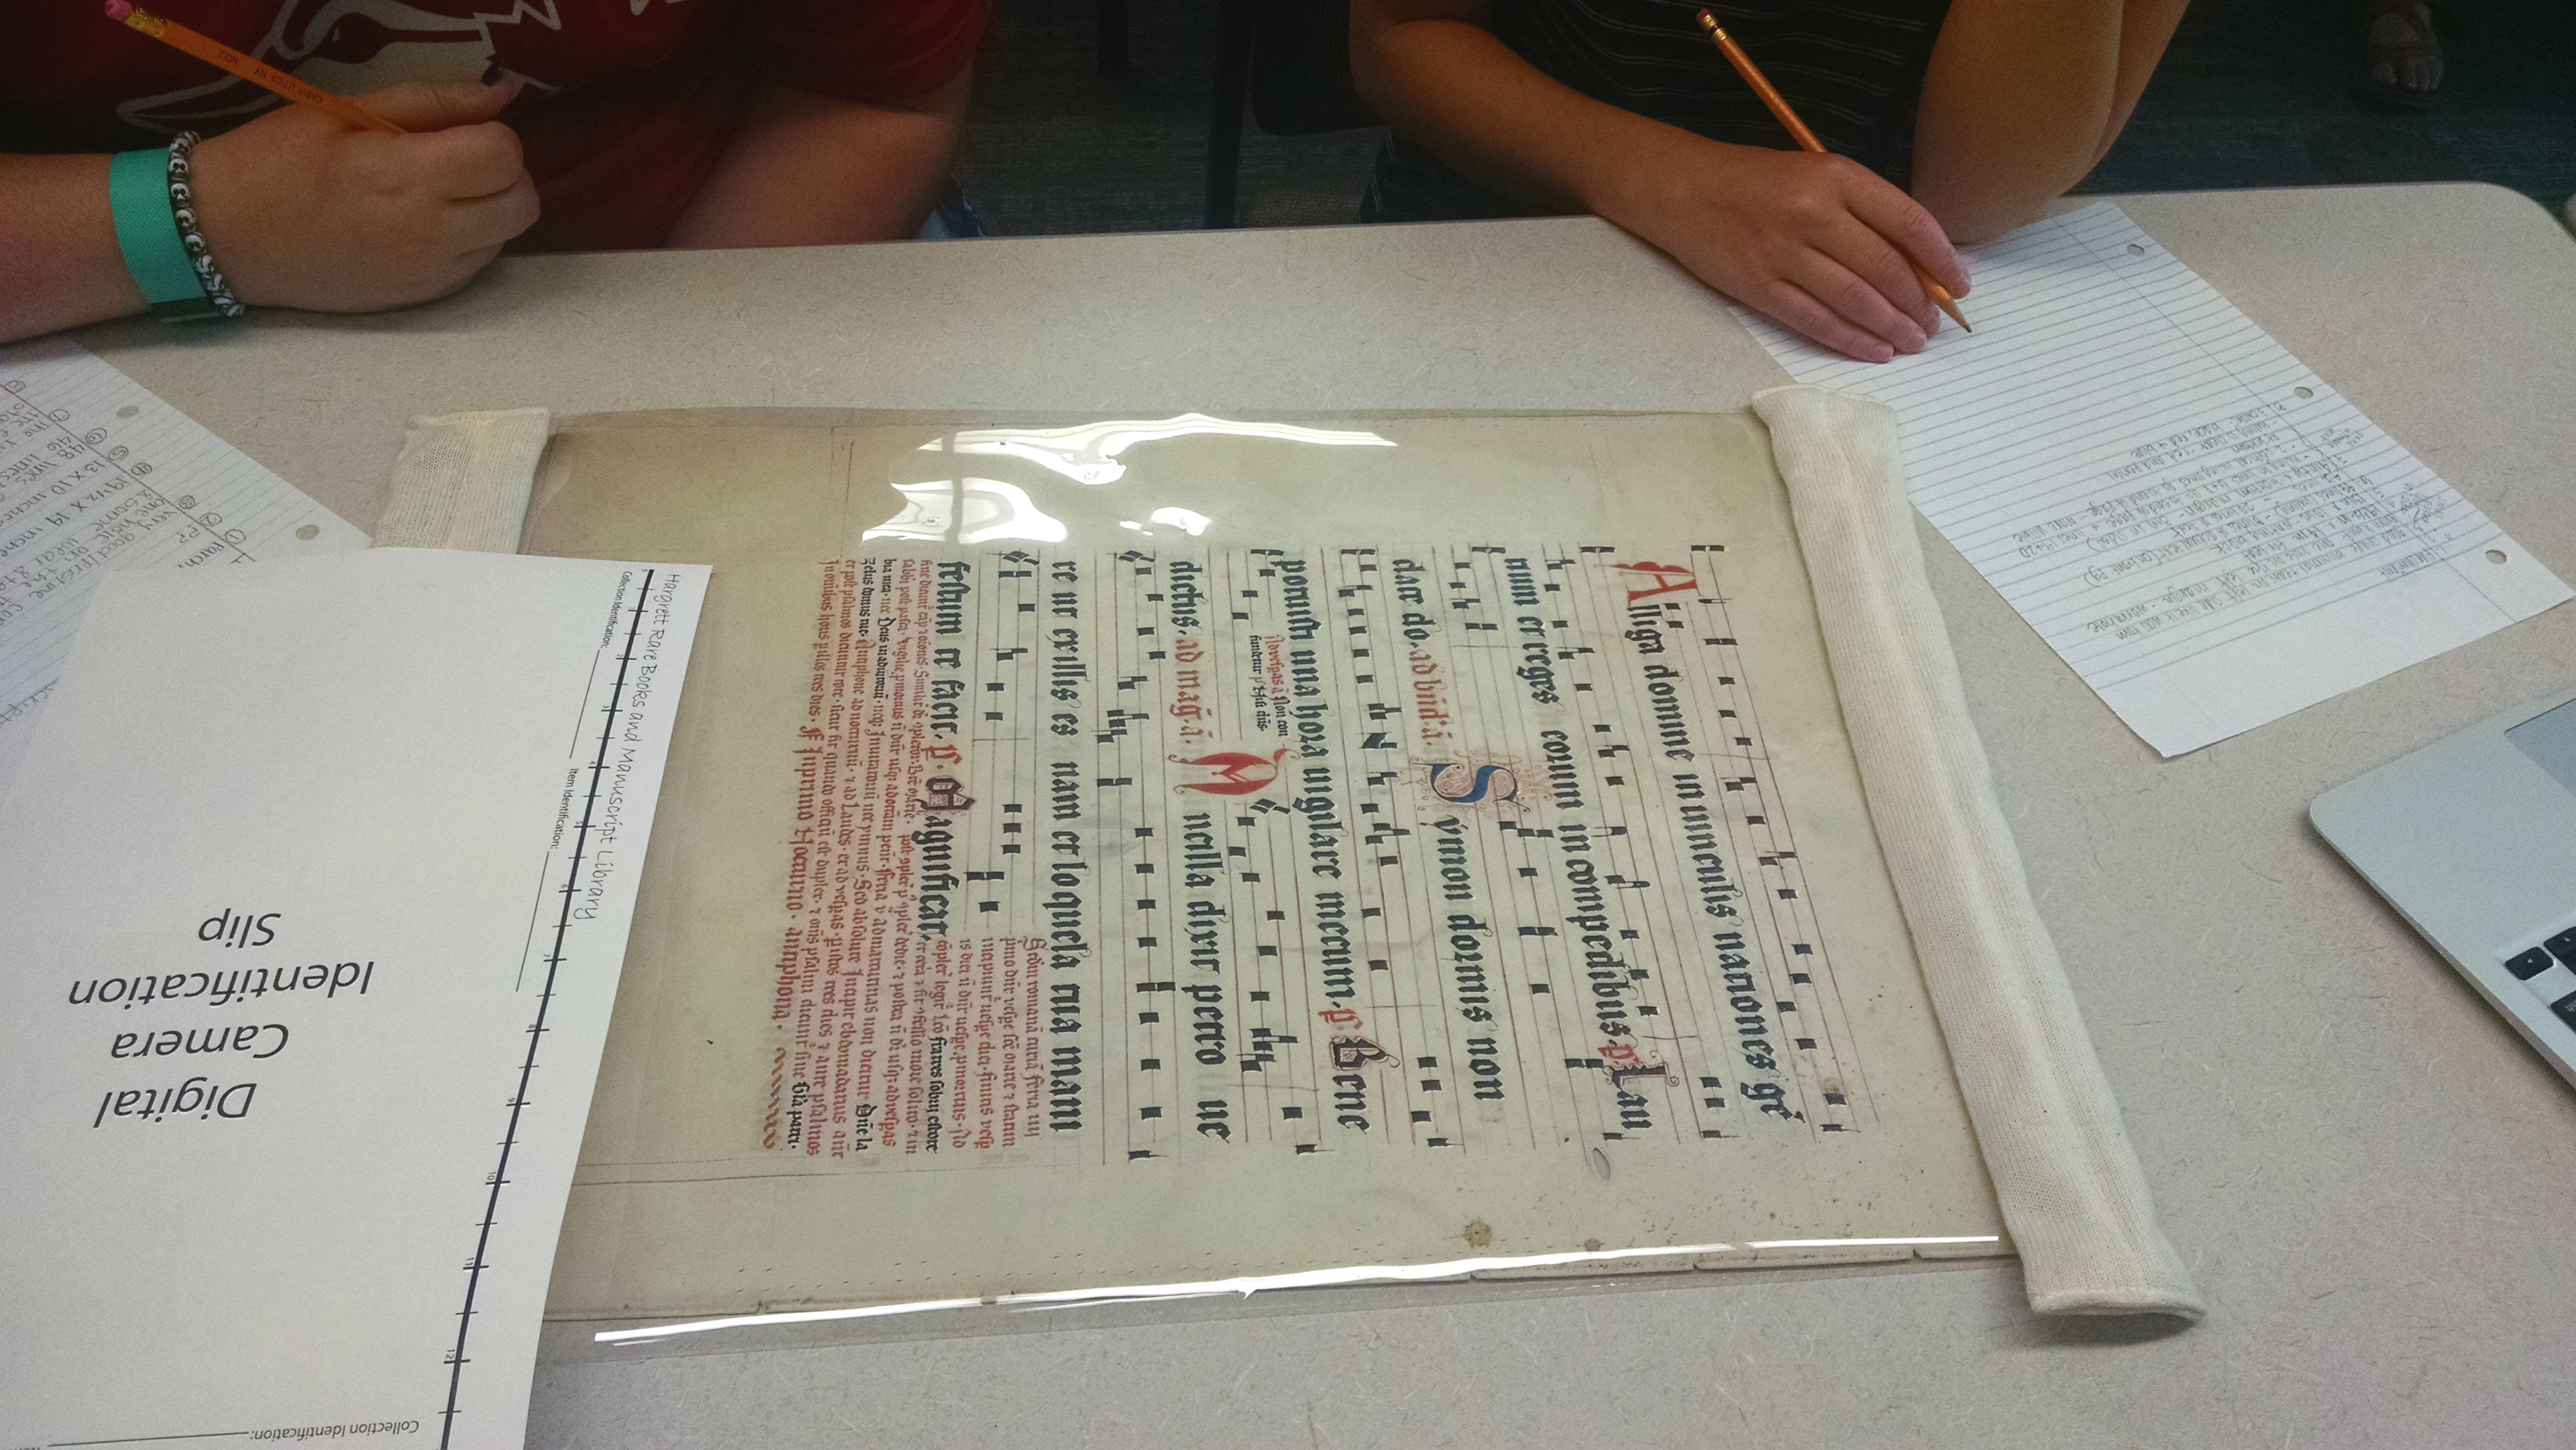 Students examine a fragment of musical notation